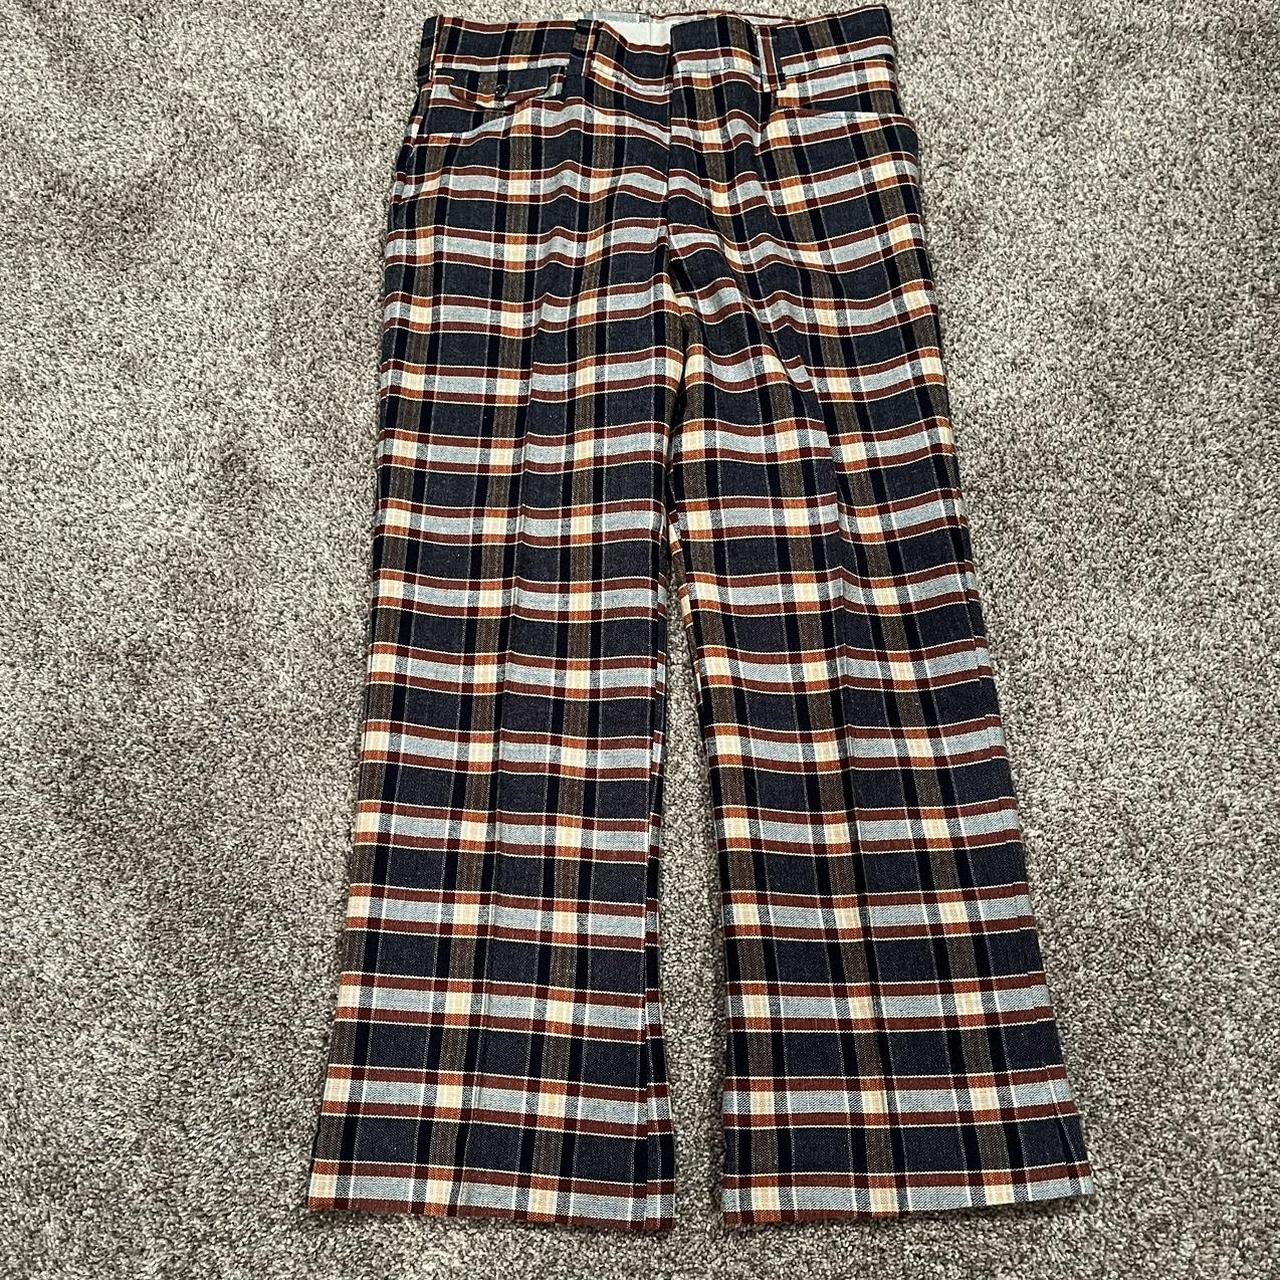 60s/70s Patterned Bell Bottom Pants Message for any... - Depop